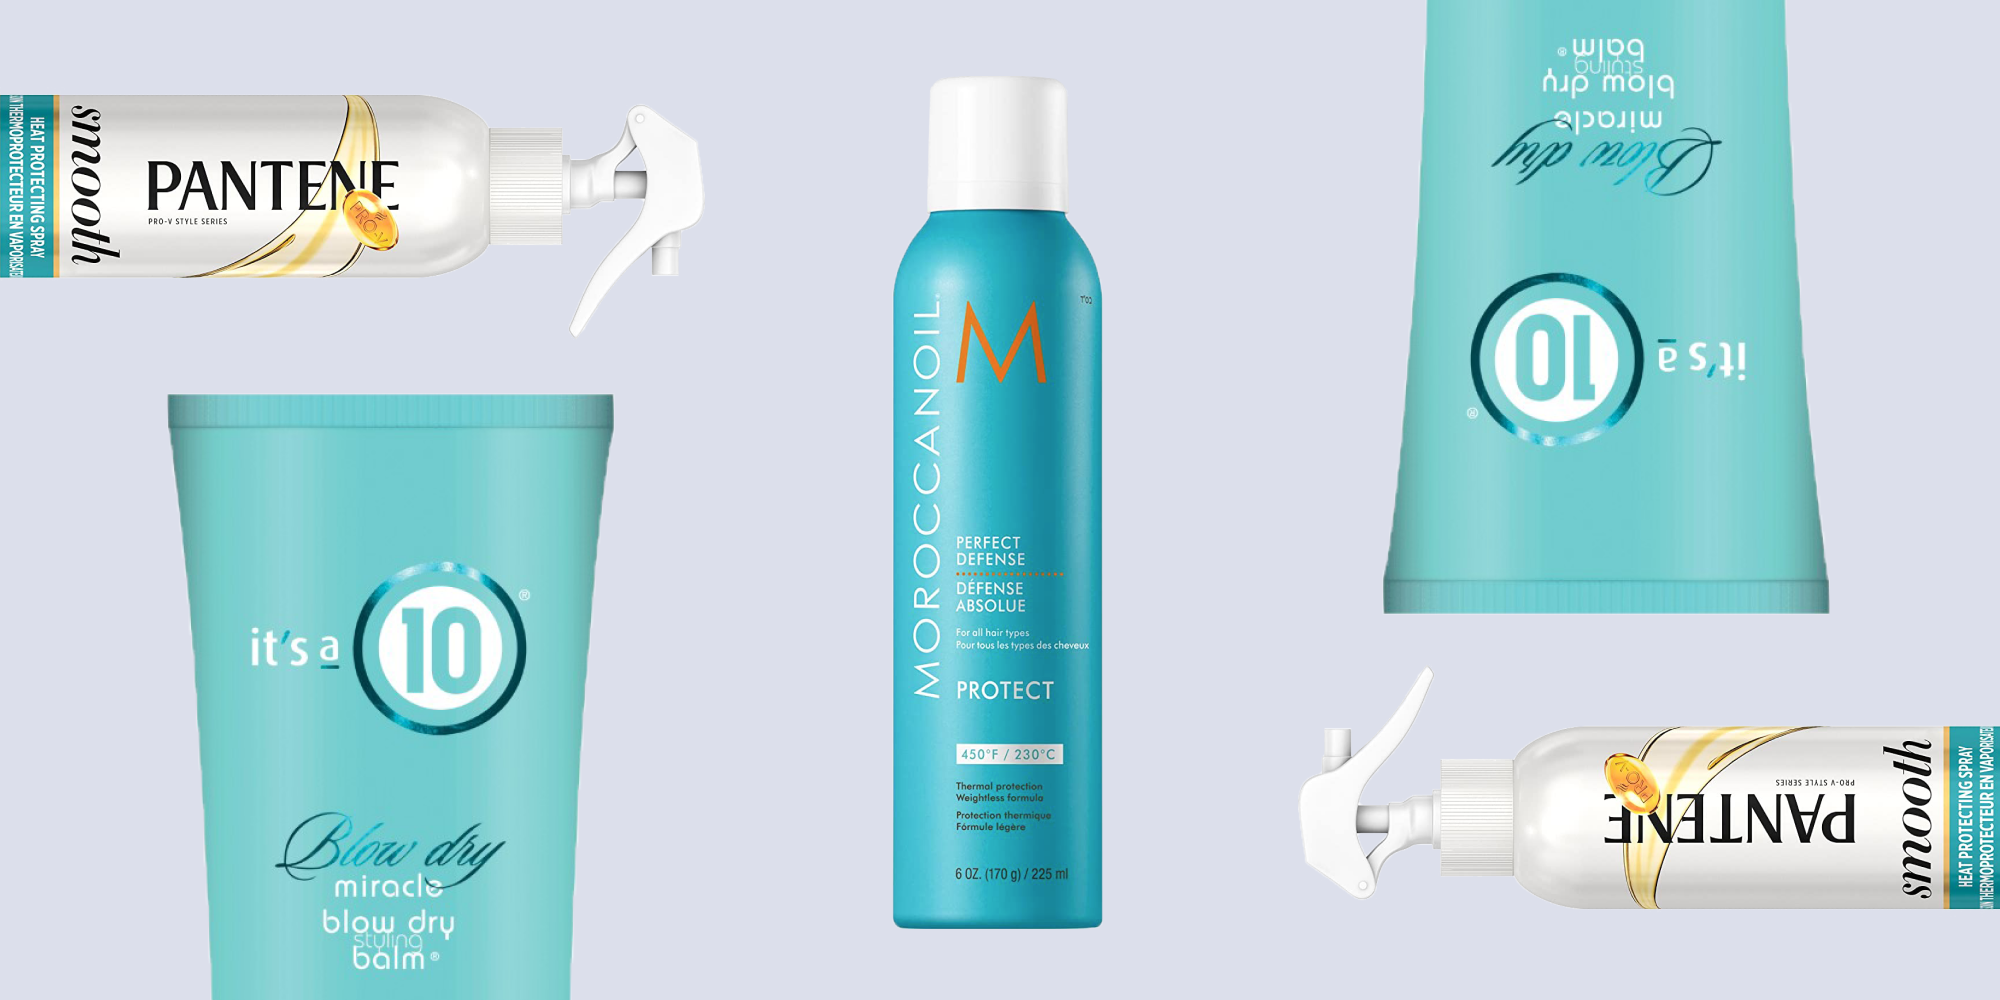 15 Best Heat Protectants for Healthy Hair, According to Stylists